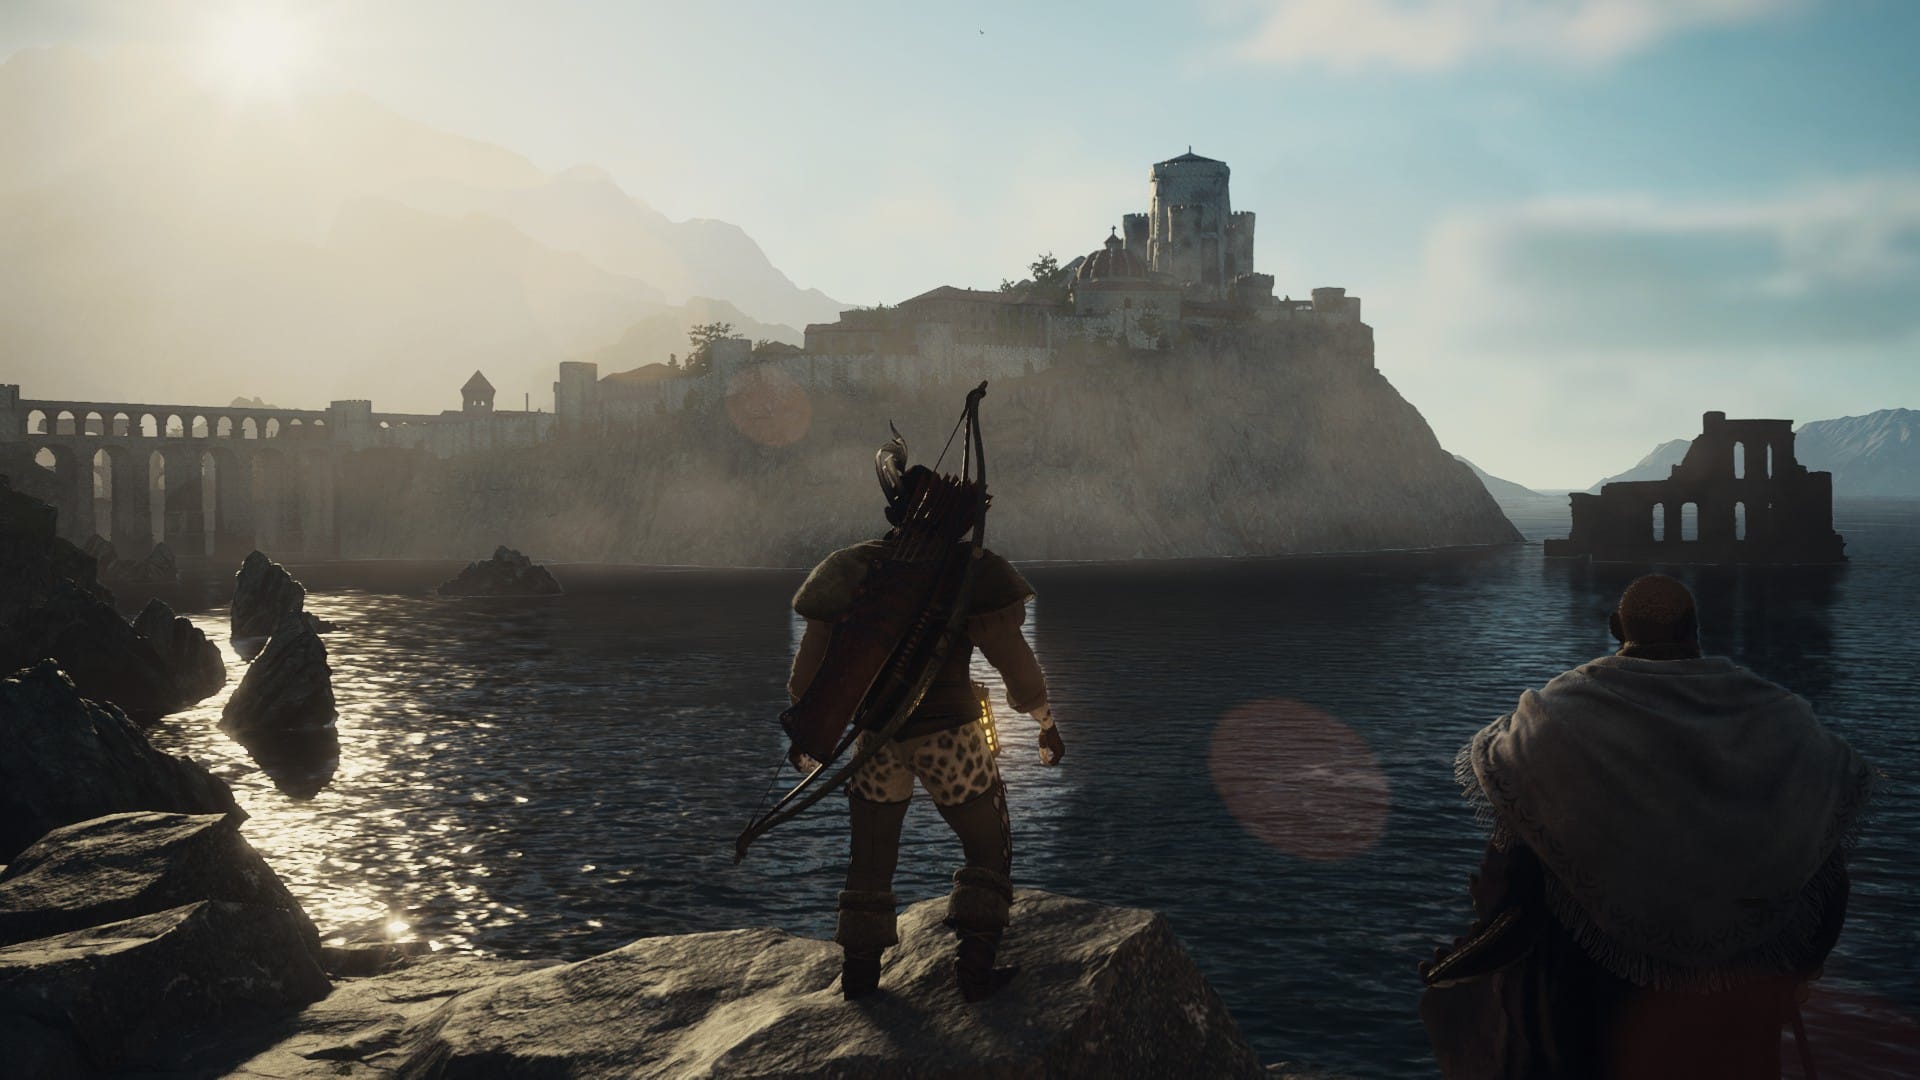 An archer stands on a rocky outcrop in a placid ocean bay looking across at a city on a peninsula.